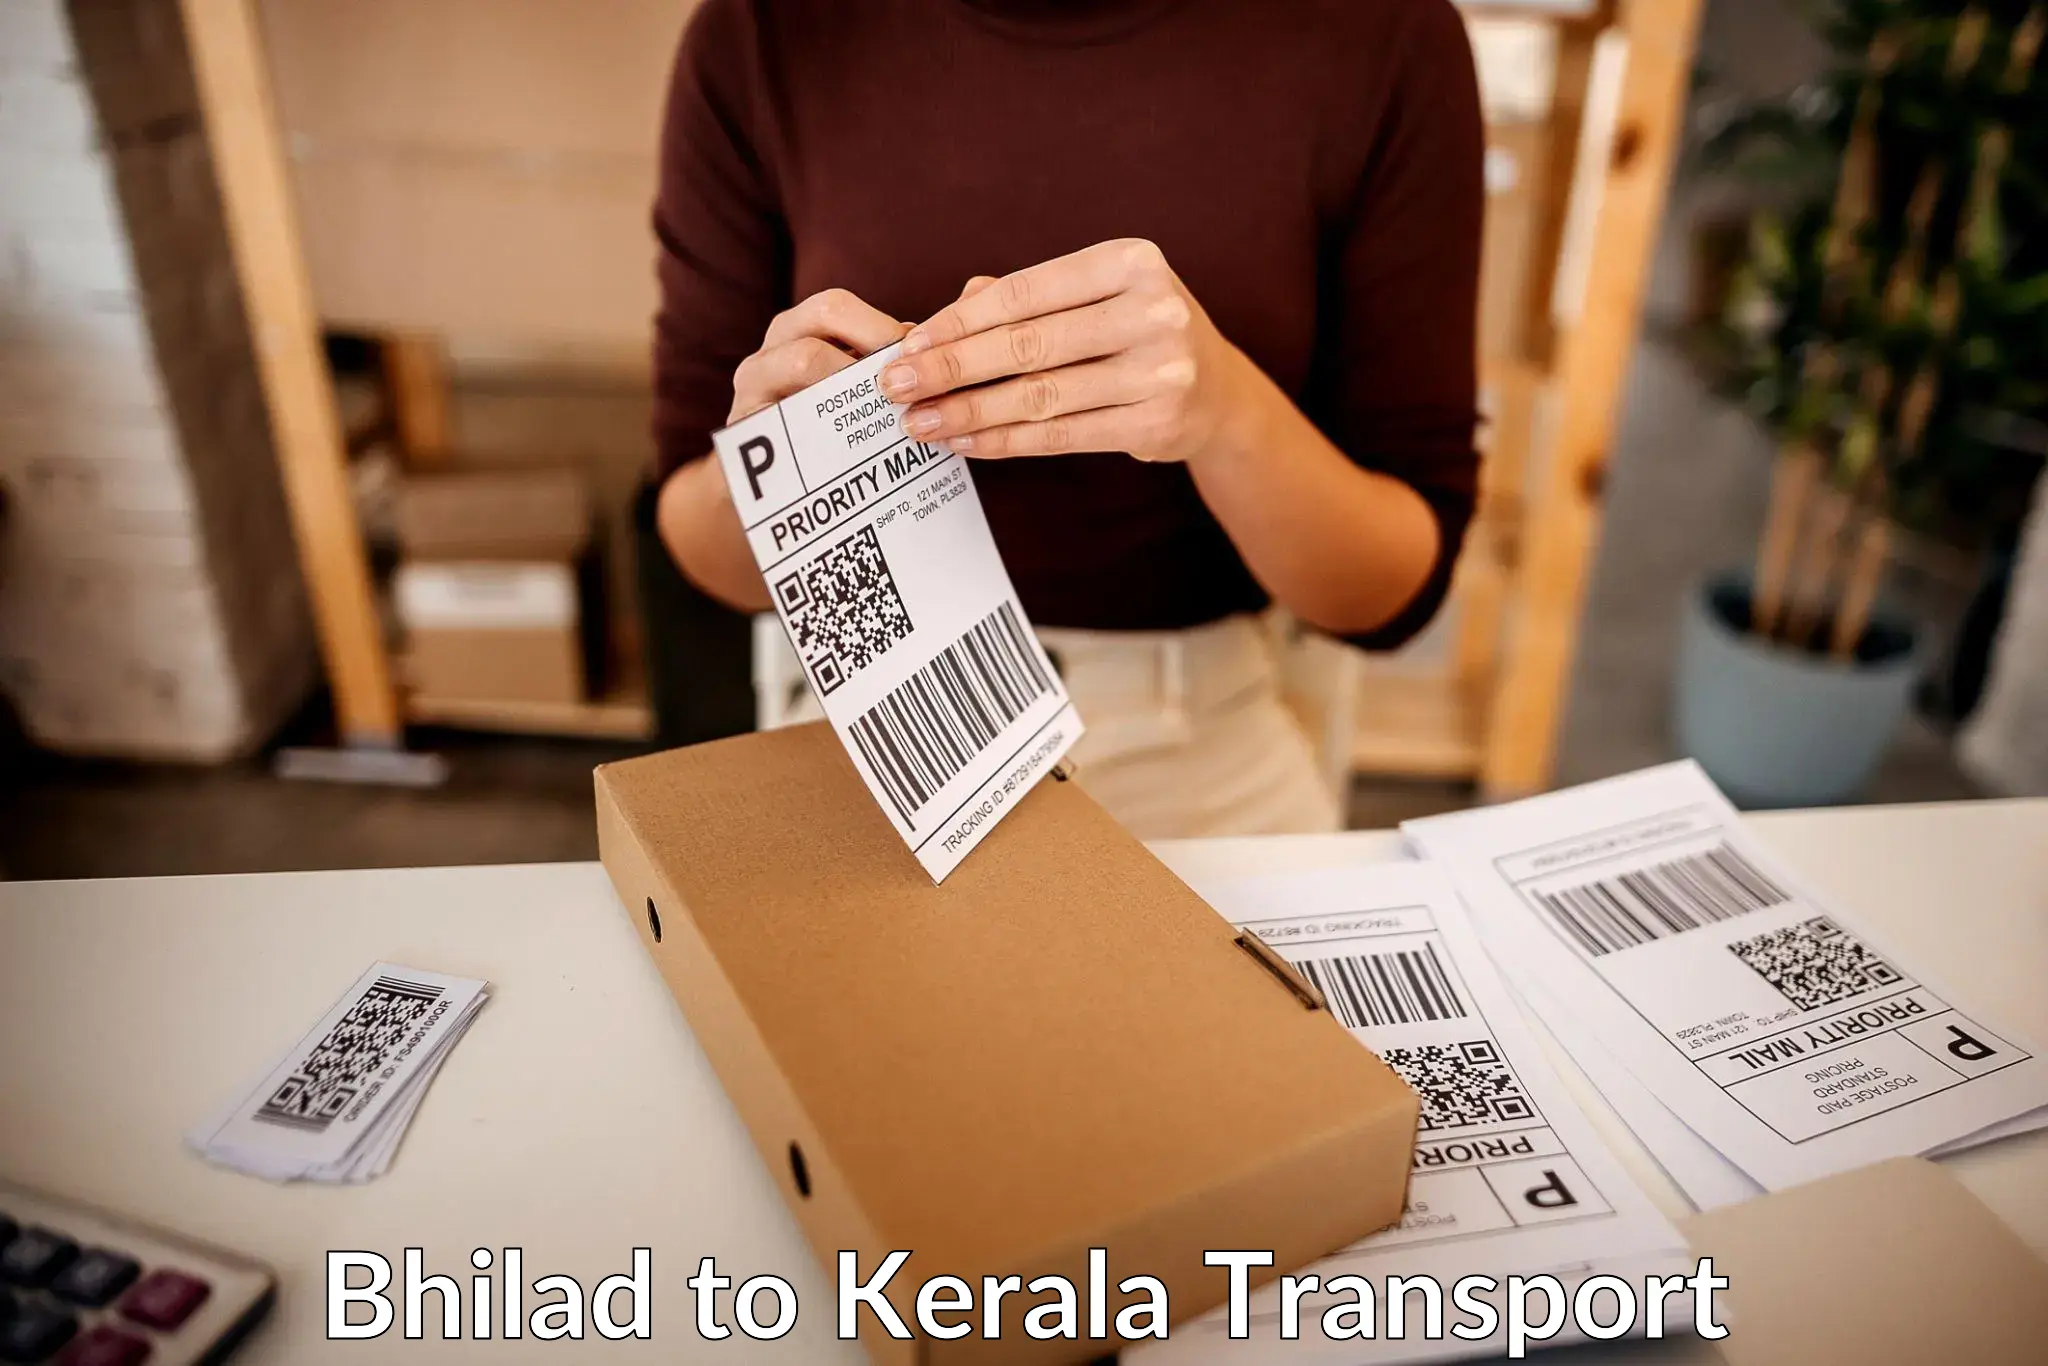 Pick up transport service Bhilad to Angamaly